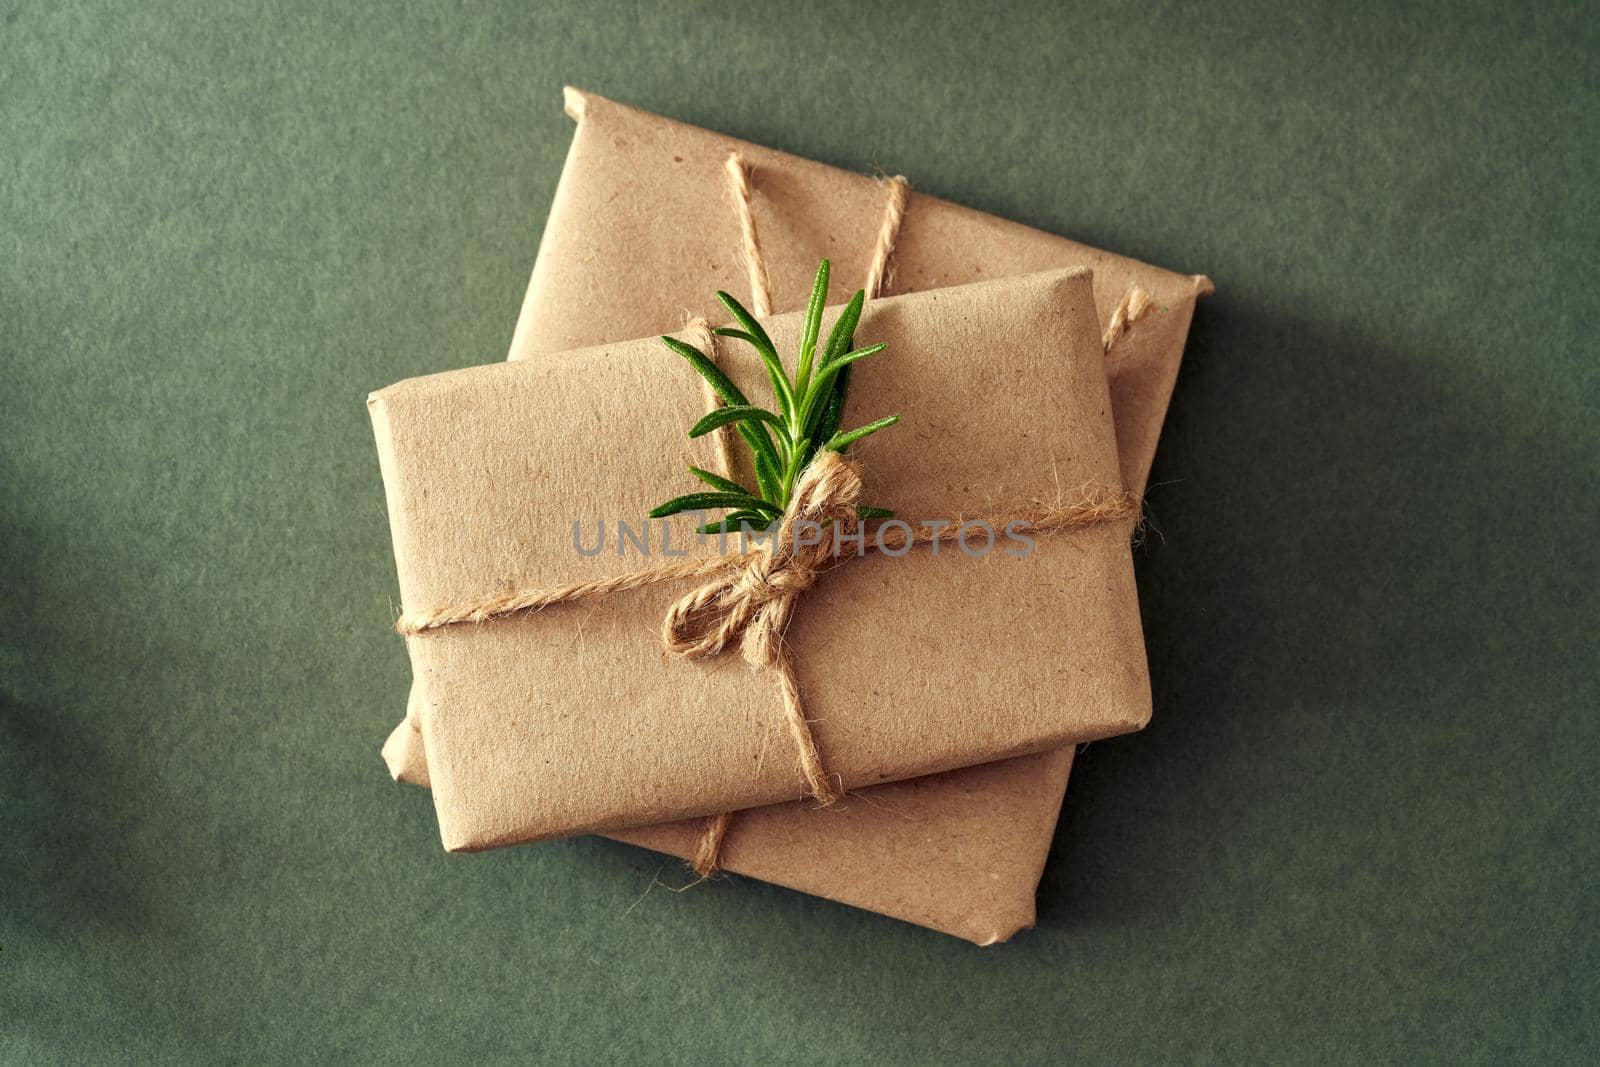 Two Christmas presents wrapped in ecological recycled paper - zero waste concept by madeleine_steinbach